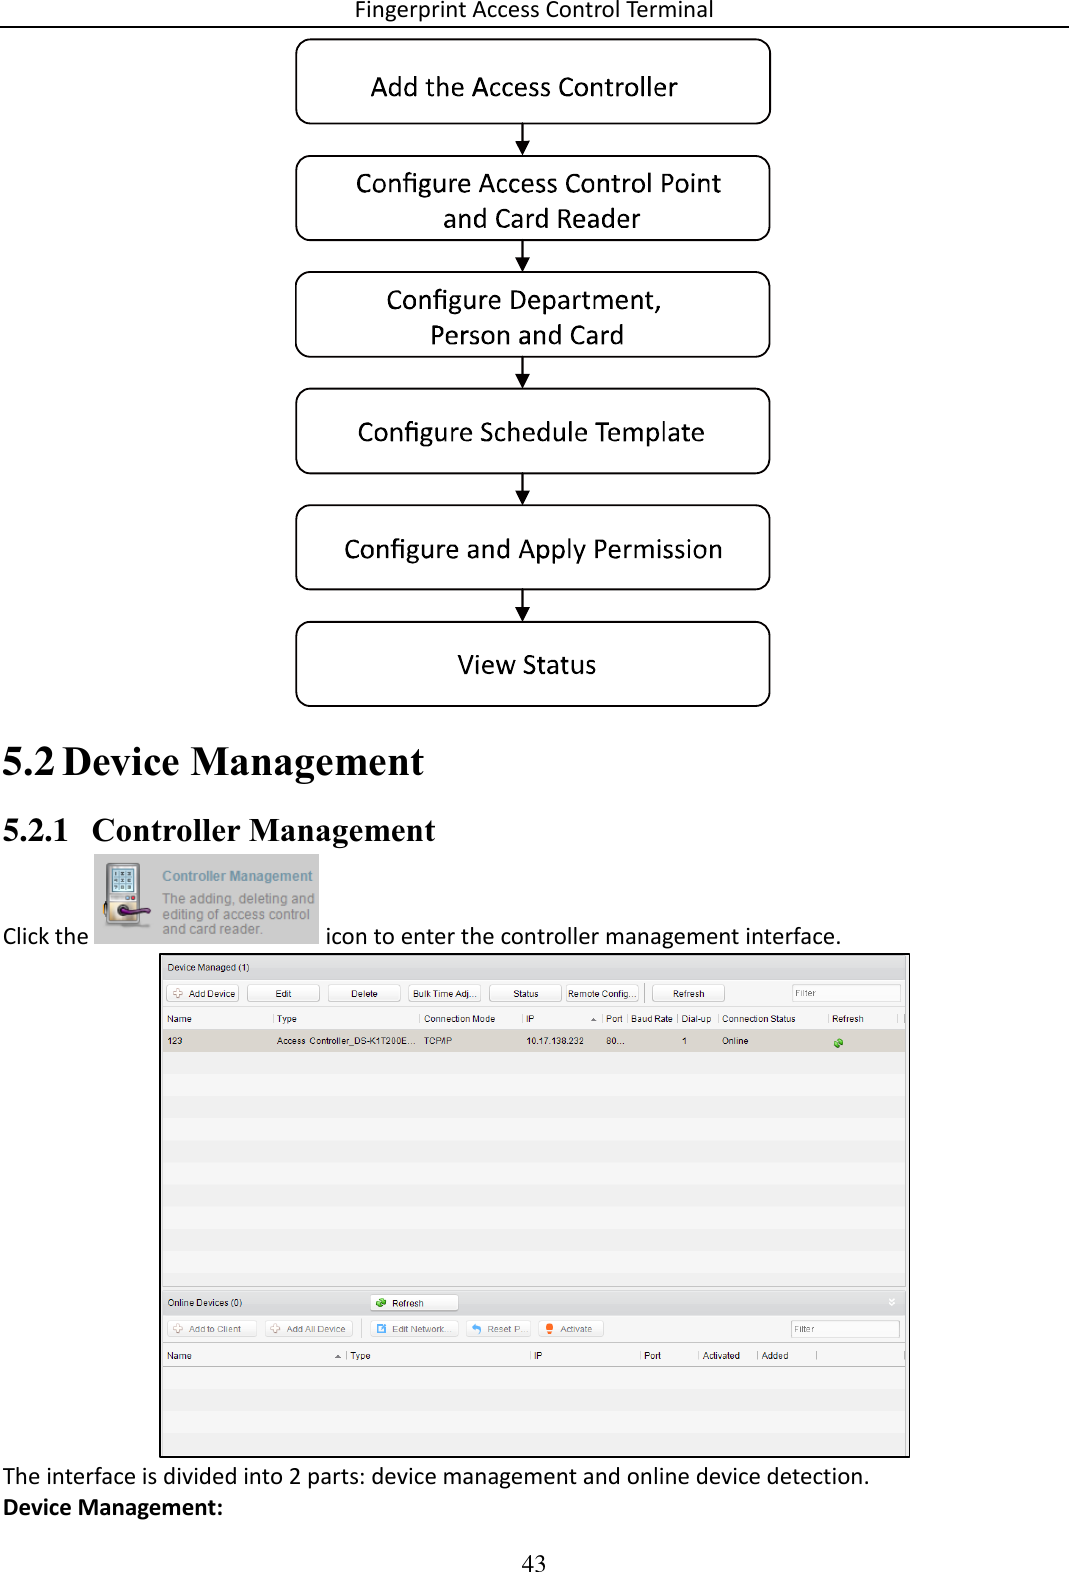 Fingerprint Access Control Terminal 43    Device Management 5.25.2.1 Controller Management Click the   icon to enter the controller management interface.  The interface is divided into 2 parts: device management and online device detection. Device Management:  